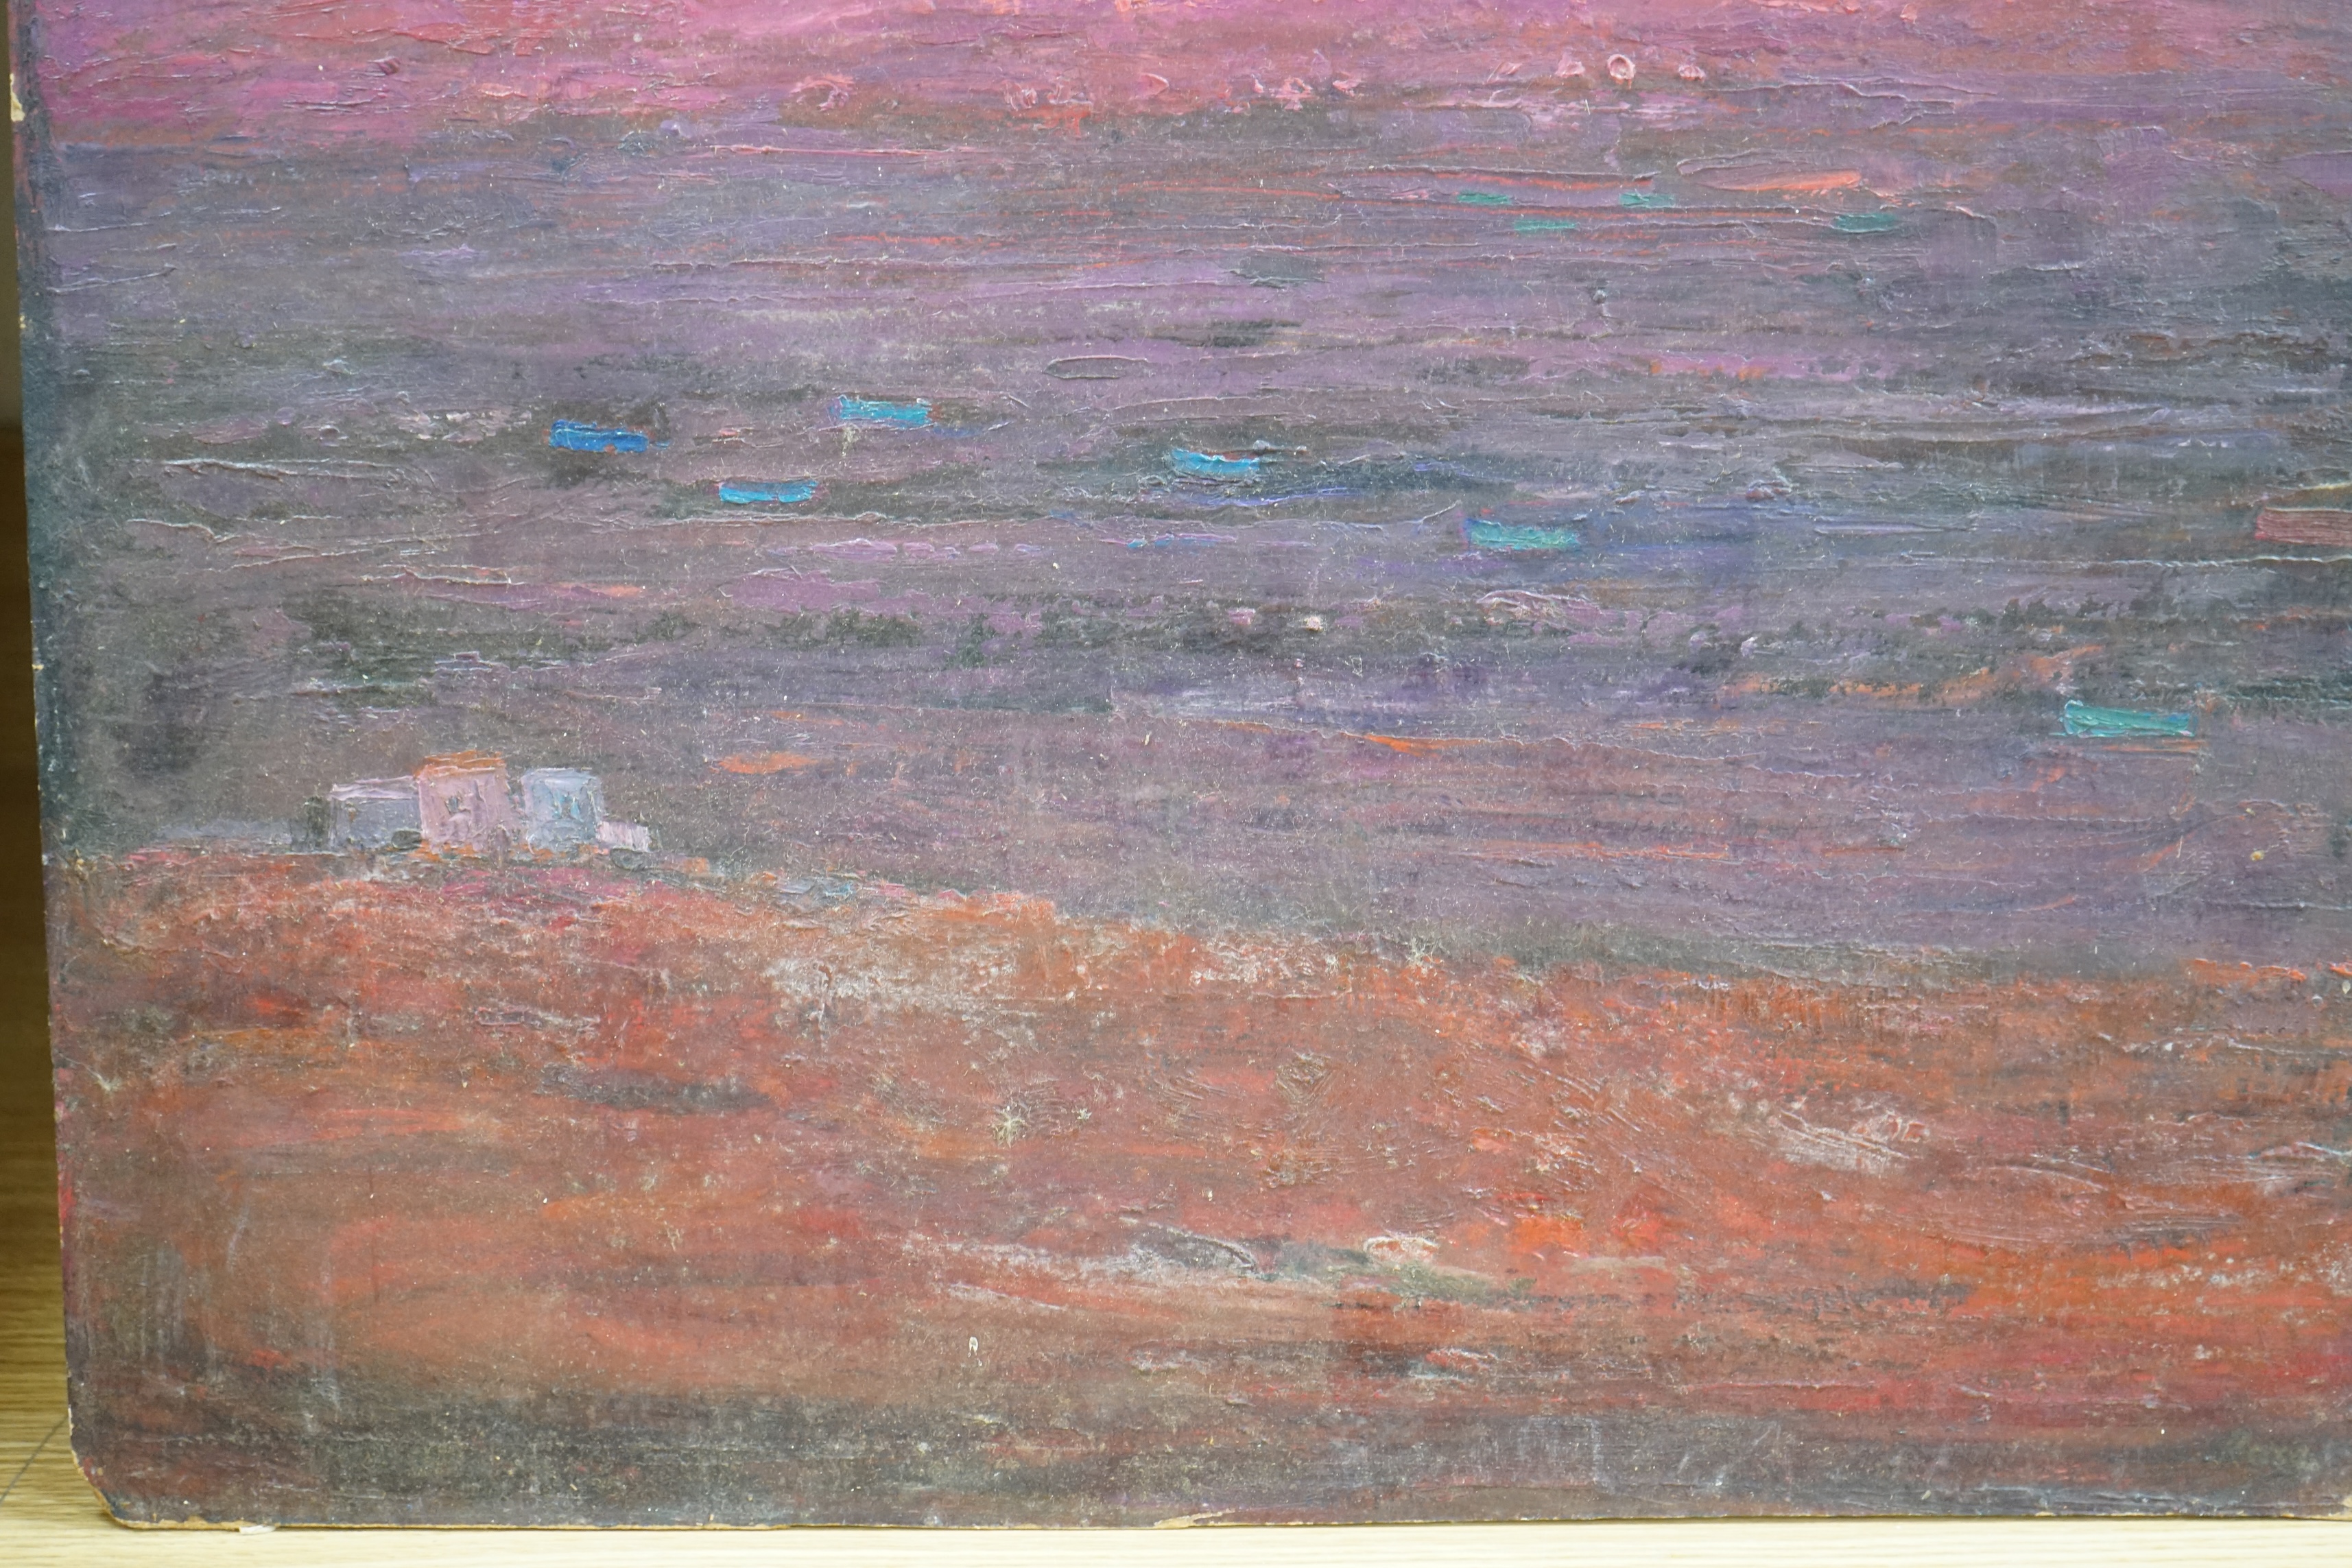 Muriel Rose (b.1923), oil on board, Abstract landscape, inscribed verso, 52 x 52cm, unframed. Condition - fair